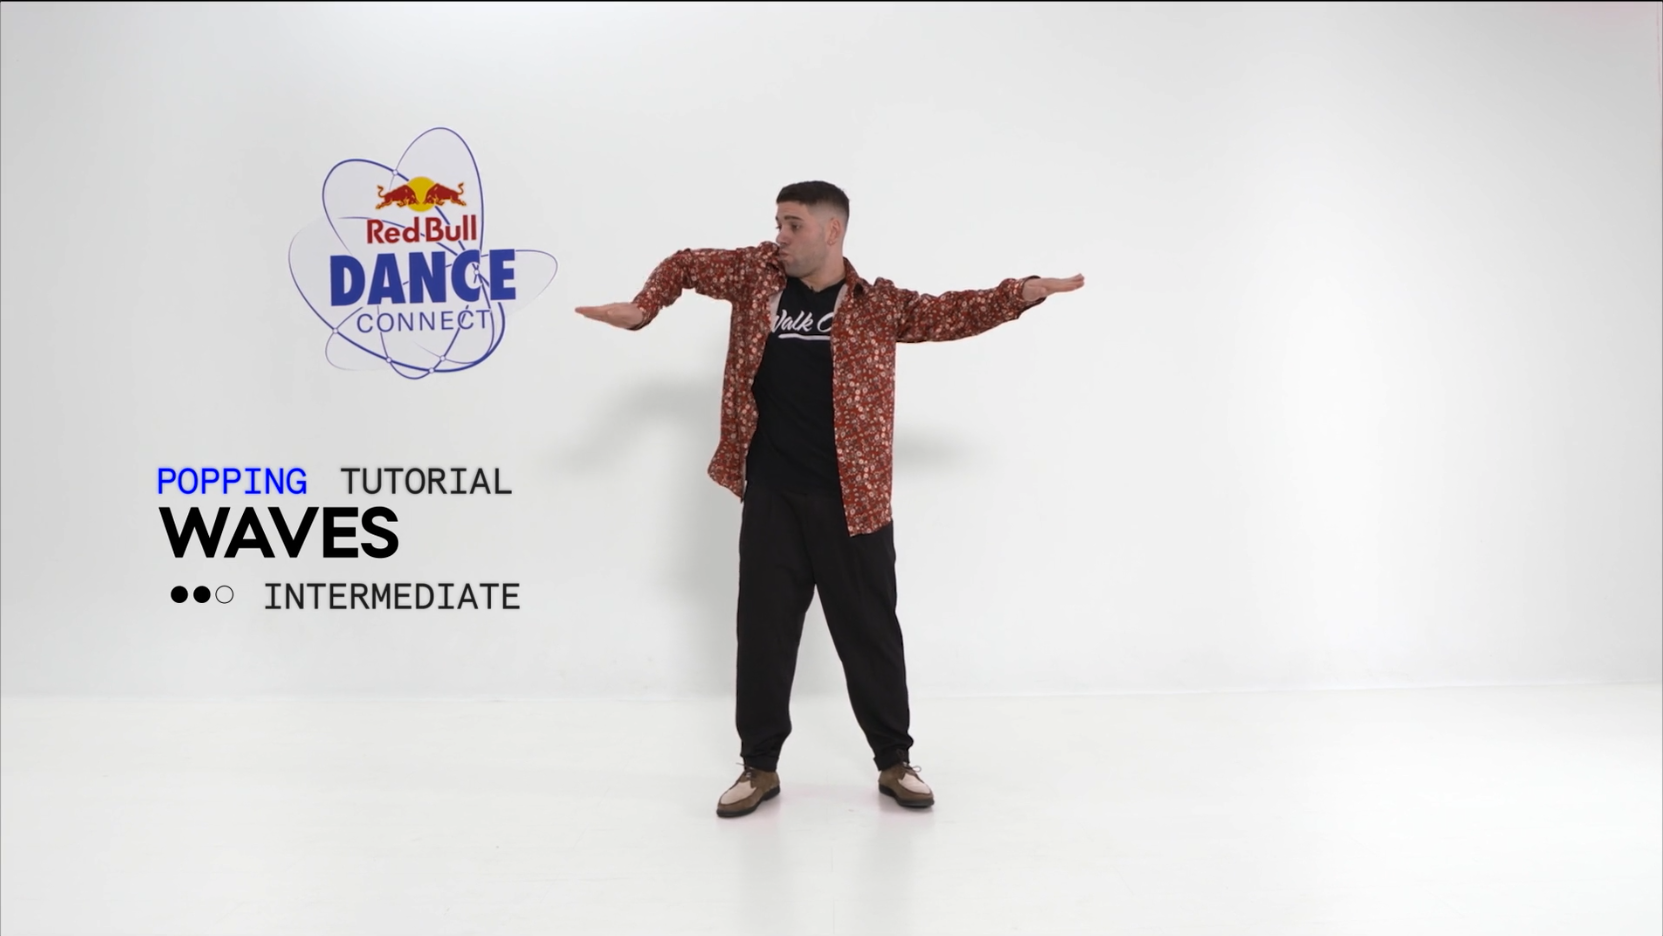 RedBull Dance Connect - Popping Tutorial with Bboy Boogiesà_foto01